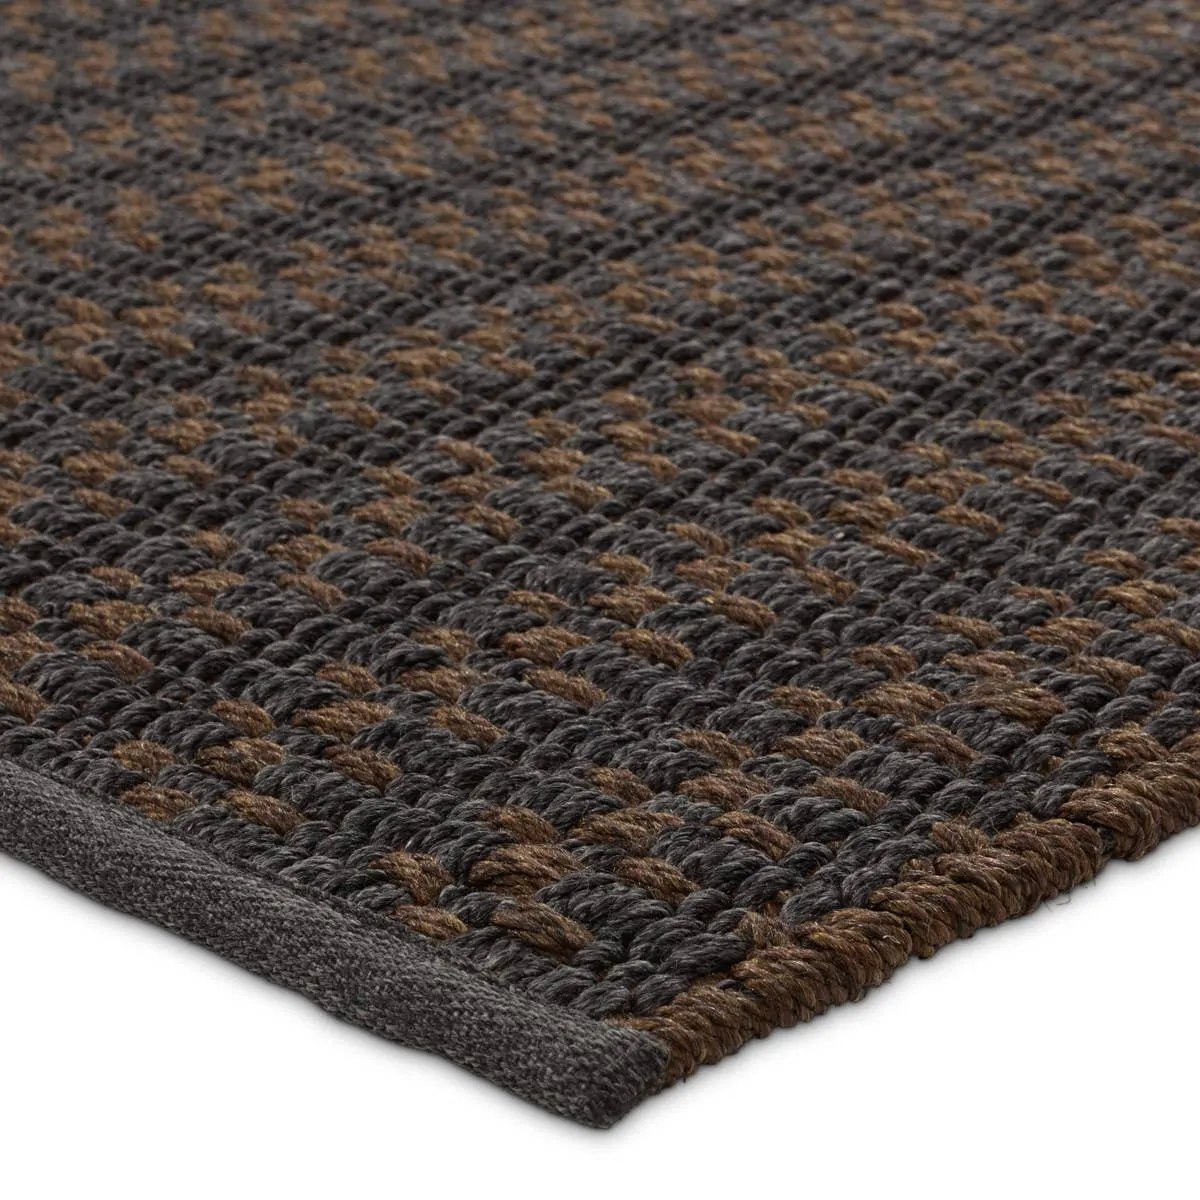 Handwoven of thick and durable performance fibers, the Talin Elmas offers a sturdy accent with evocative texture to any space. Neutral, versatile colorways combine with an undulating striped weave for a not-so-solid, but perfectly grounding, modern design. Amethyst Home provides interior design, new home construction design consulting, vintage area rugs, and lighting in the Scottsdale metro area.